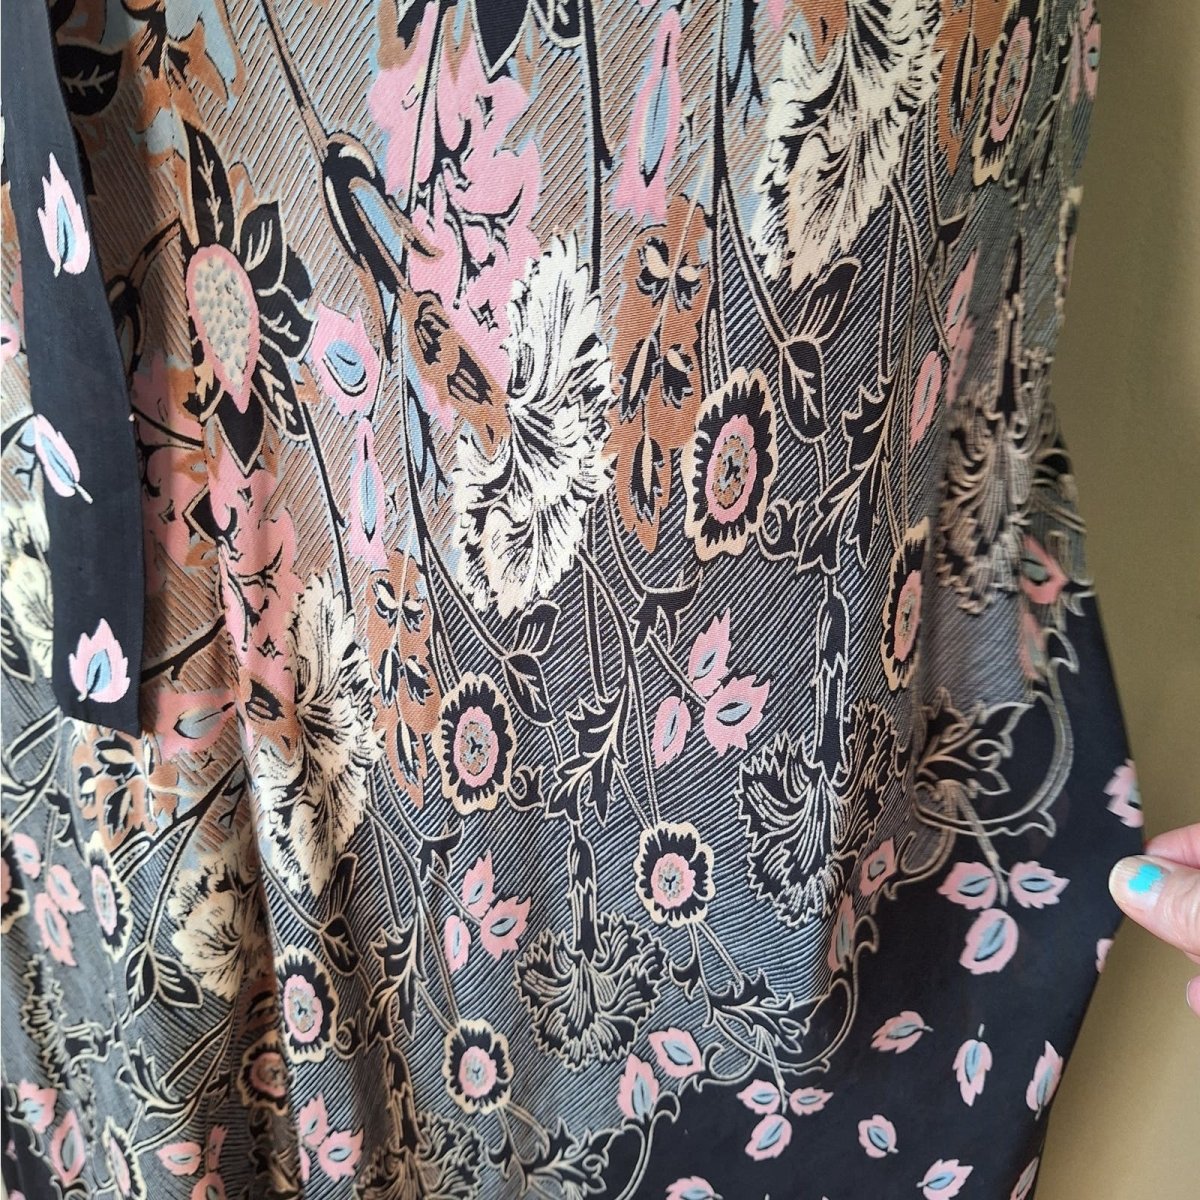 Vintage 70s does 30s Semi-Sheer Black Floral Maxi Dress Women Size Large - themallvintage The Mall Vintage